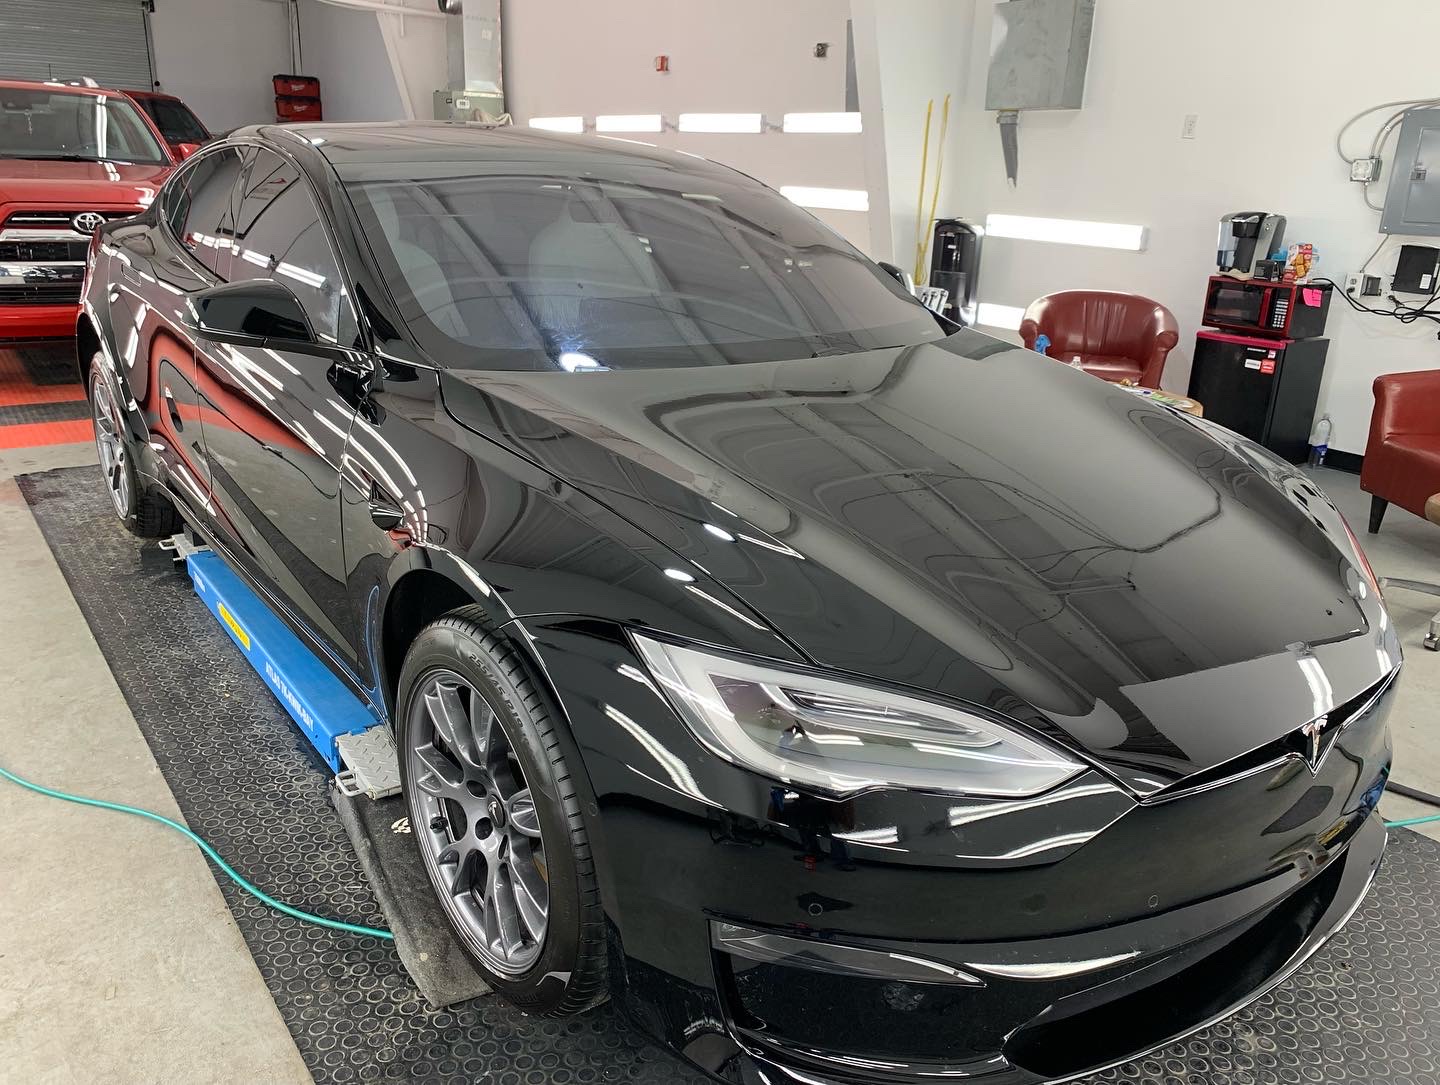 Paint Protection Film (PPF) of a 2022 Tesla Model S